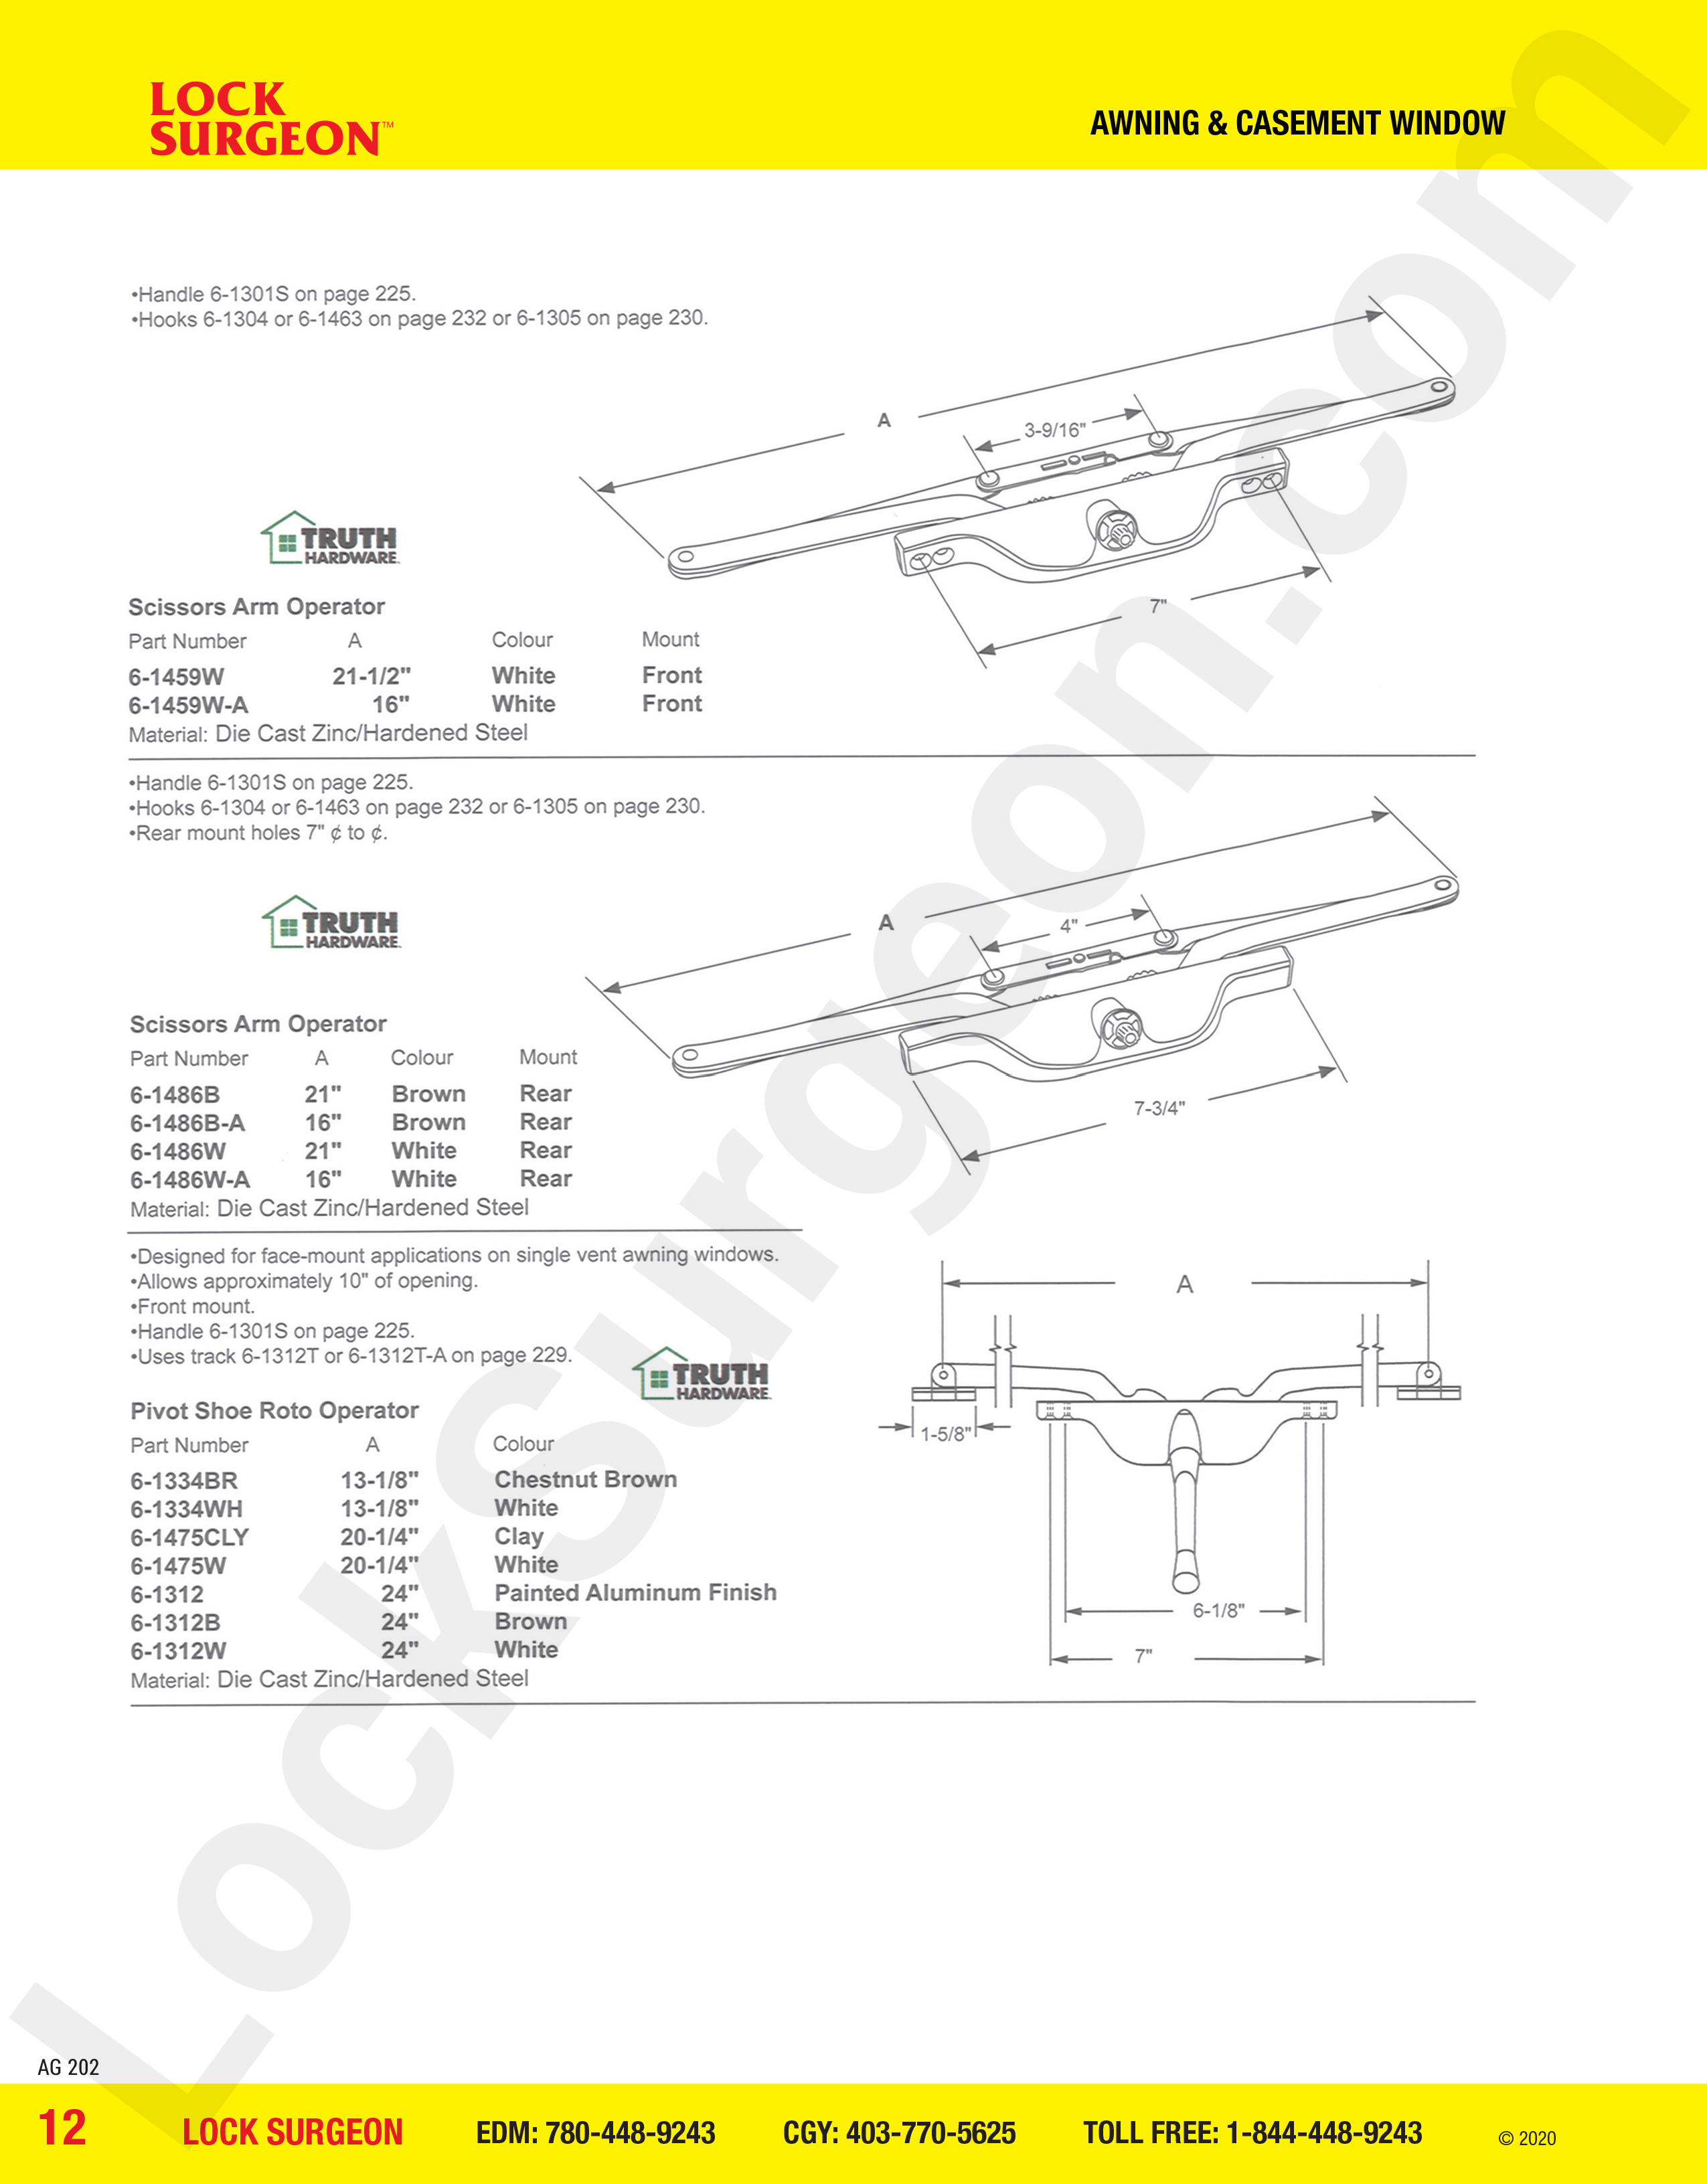 awning and casement window parts for ellipse operators.